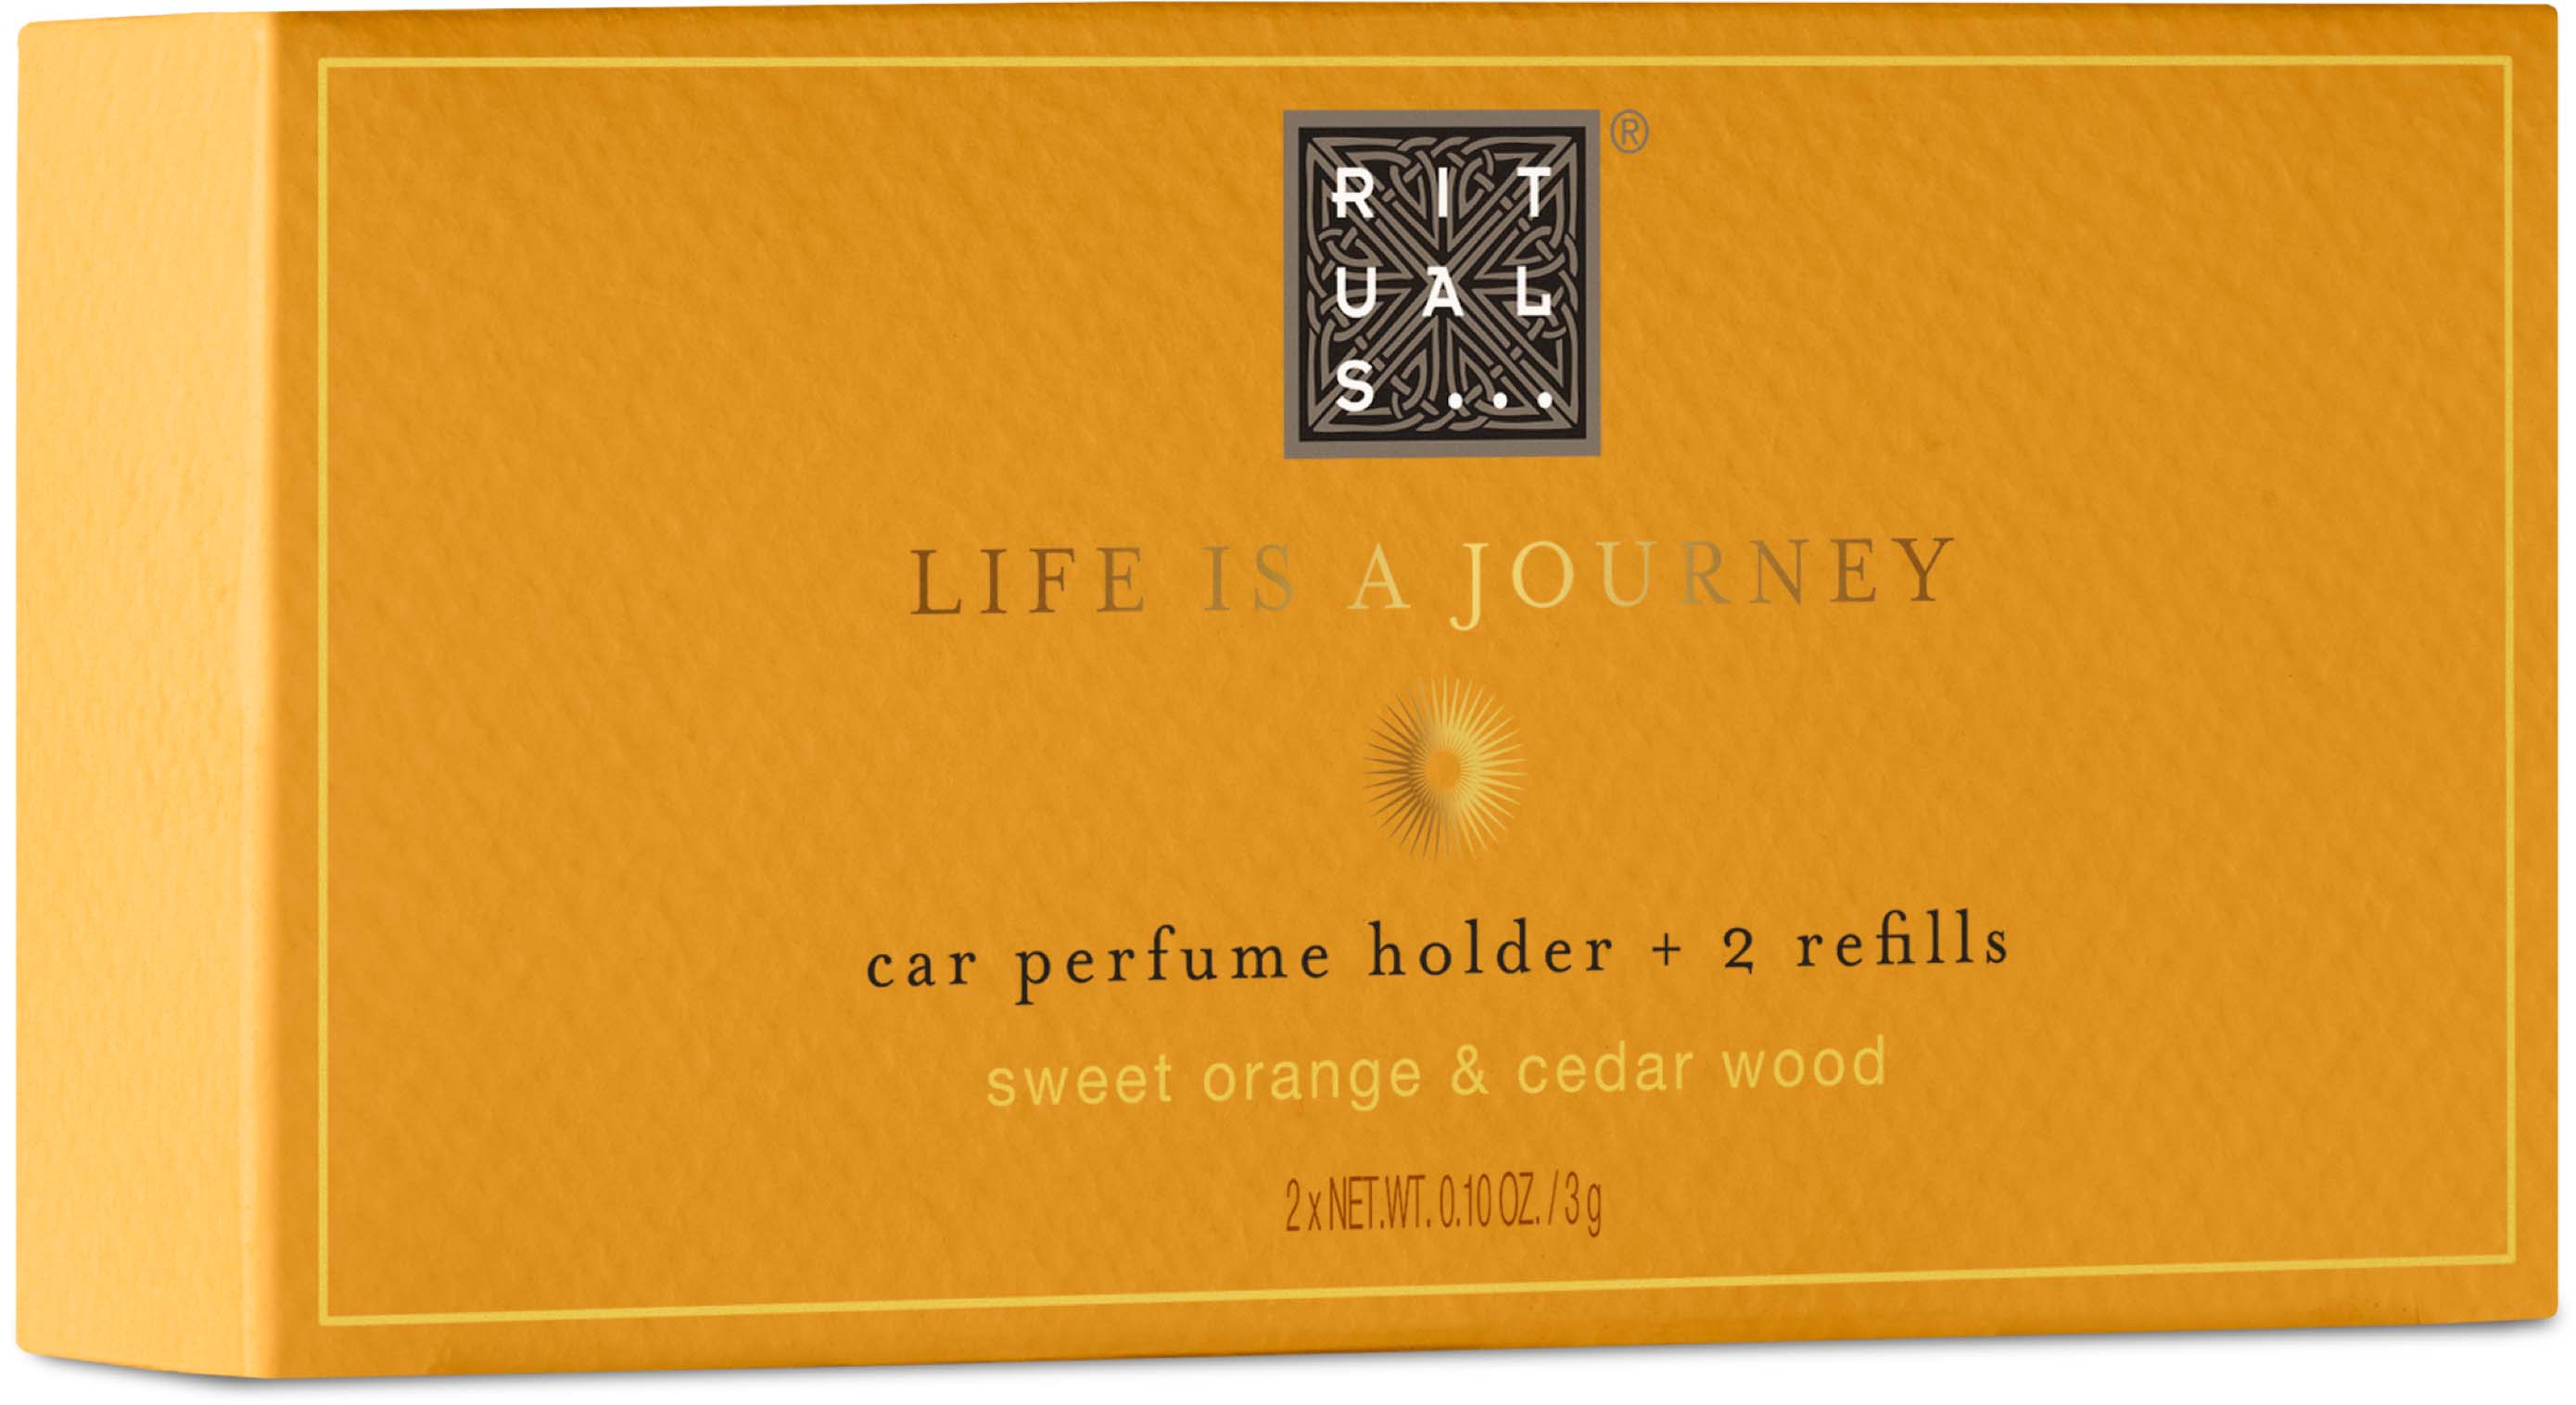 Rituals The Ritual Of Mehr Home Fragrance Life is a Journey Car Perfume 6 g